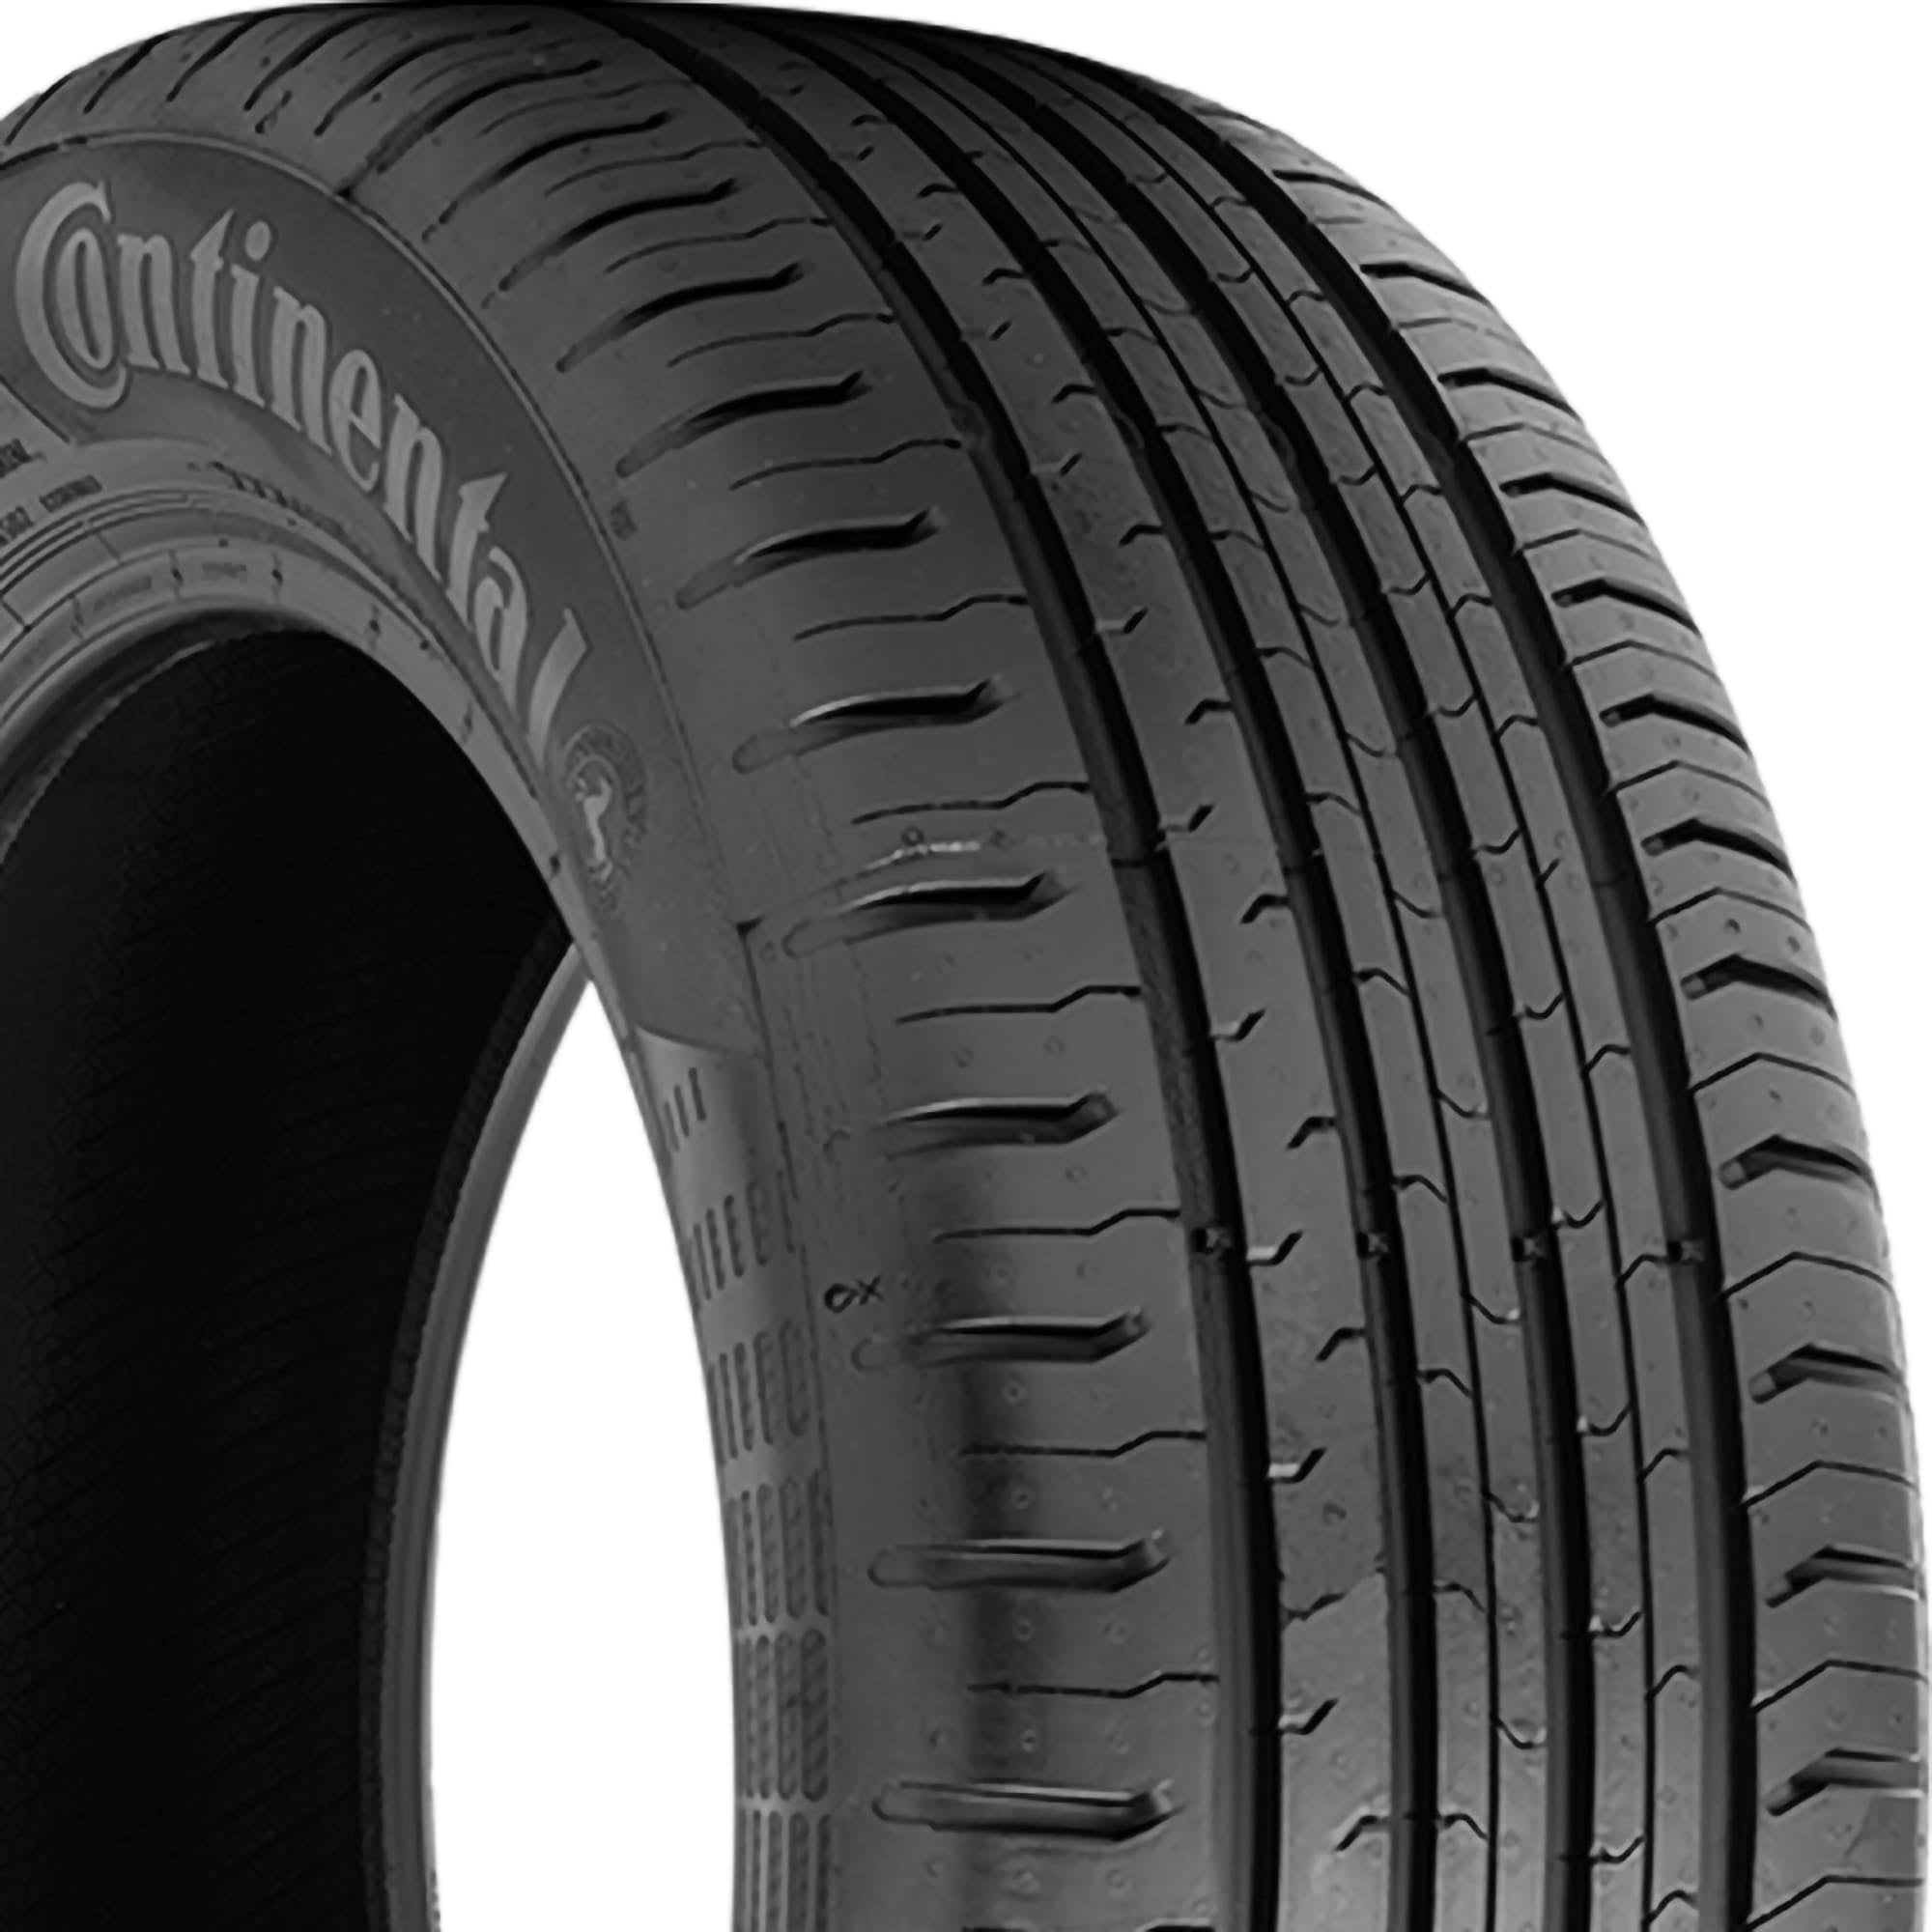 Continental ContiSportContact 5 Summer 245/45R17 95Y Passenger Tire Fits:  2000 Ford Mustang SVT Cobra R, 2003-04 Ford Mustang Mach 1